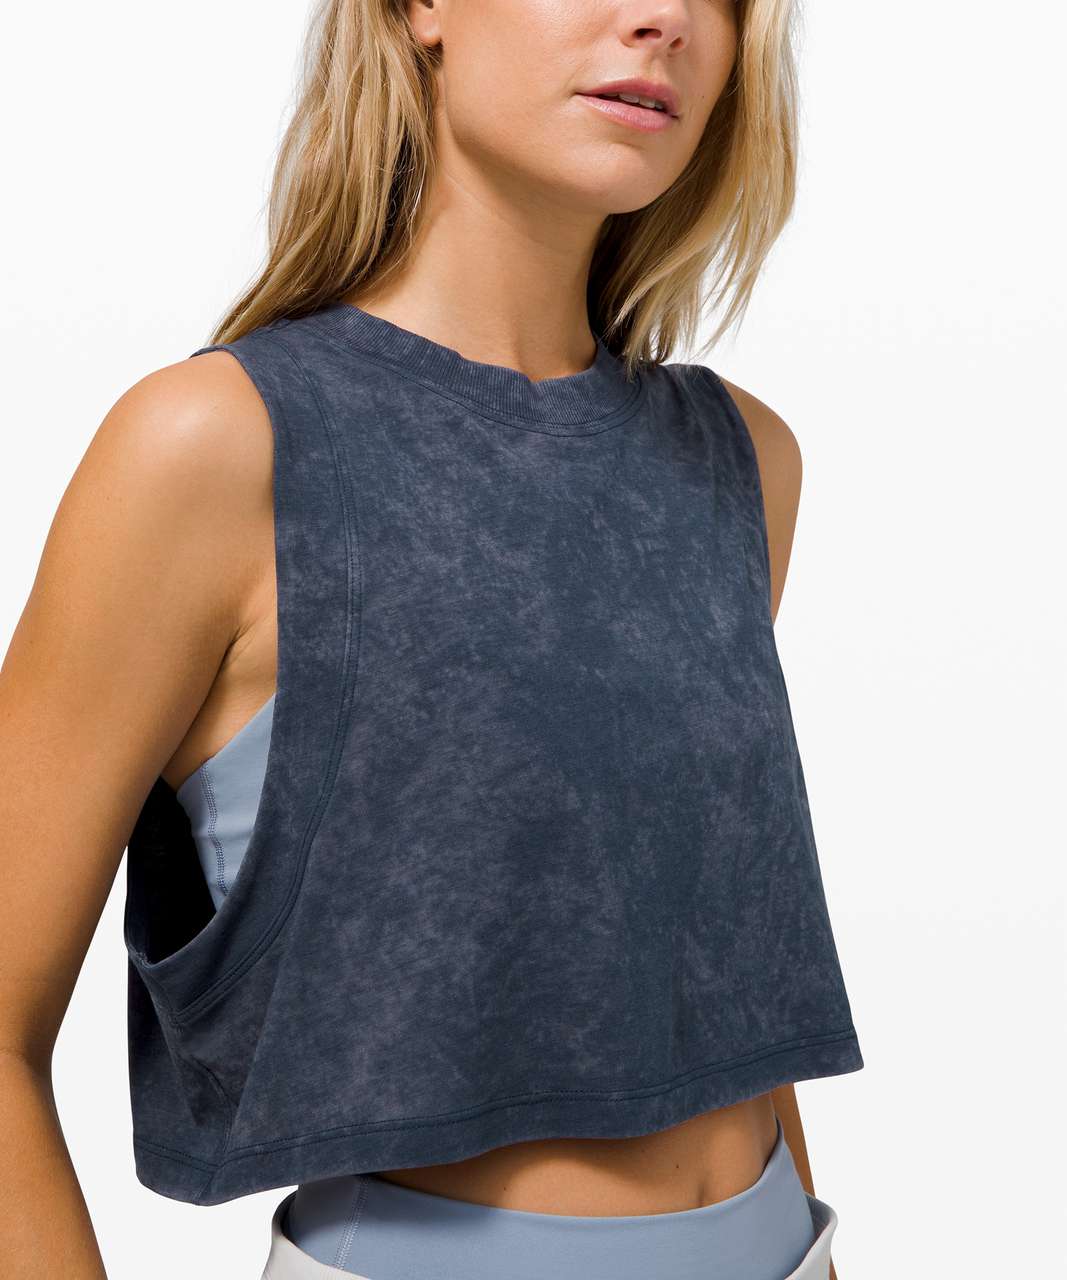 Lululemon All Yours Crop Tank *Wash - Cloudy Wash True Navy